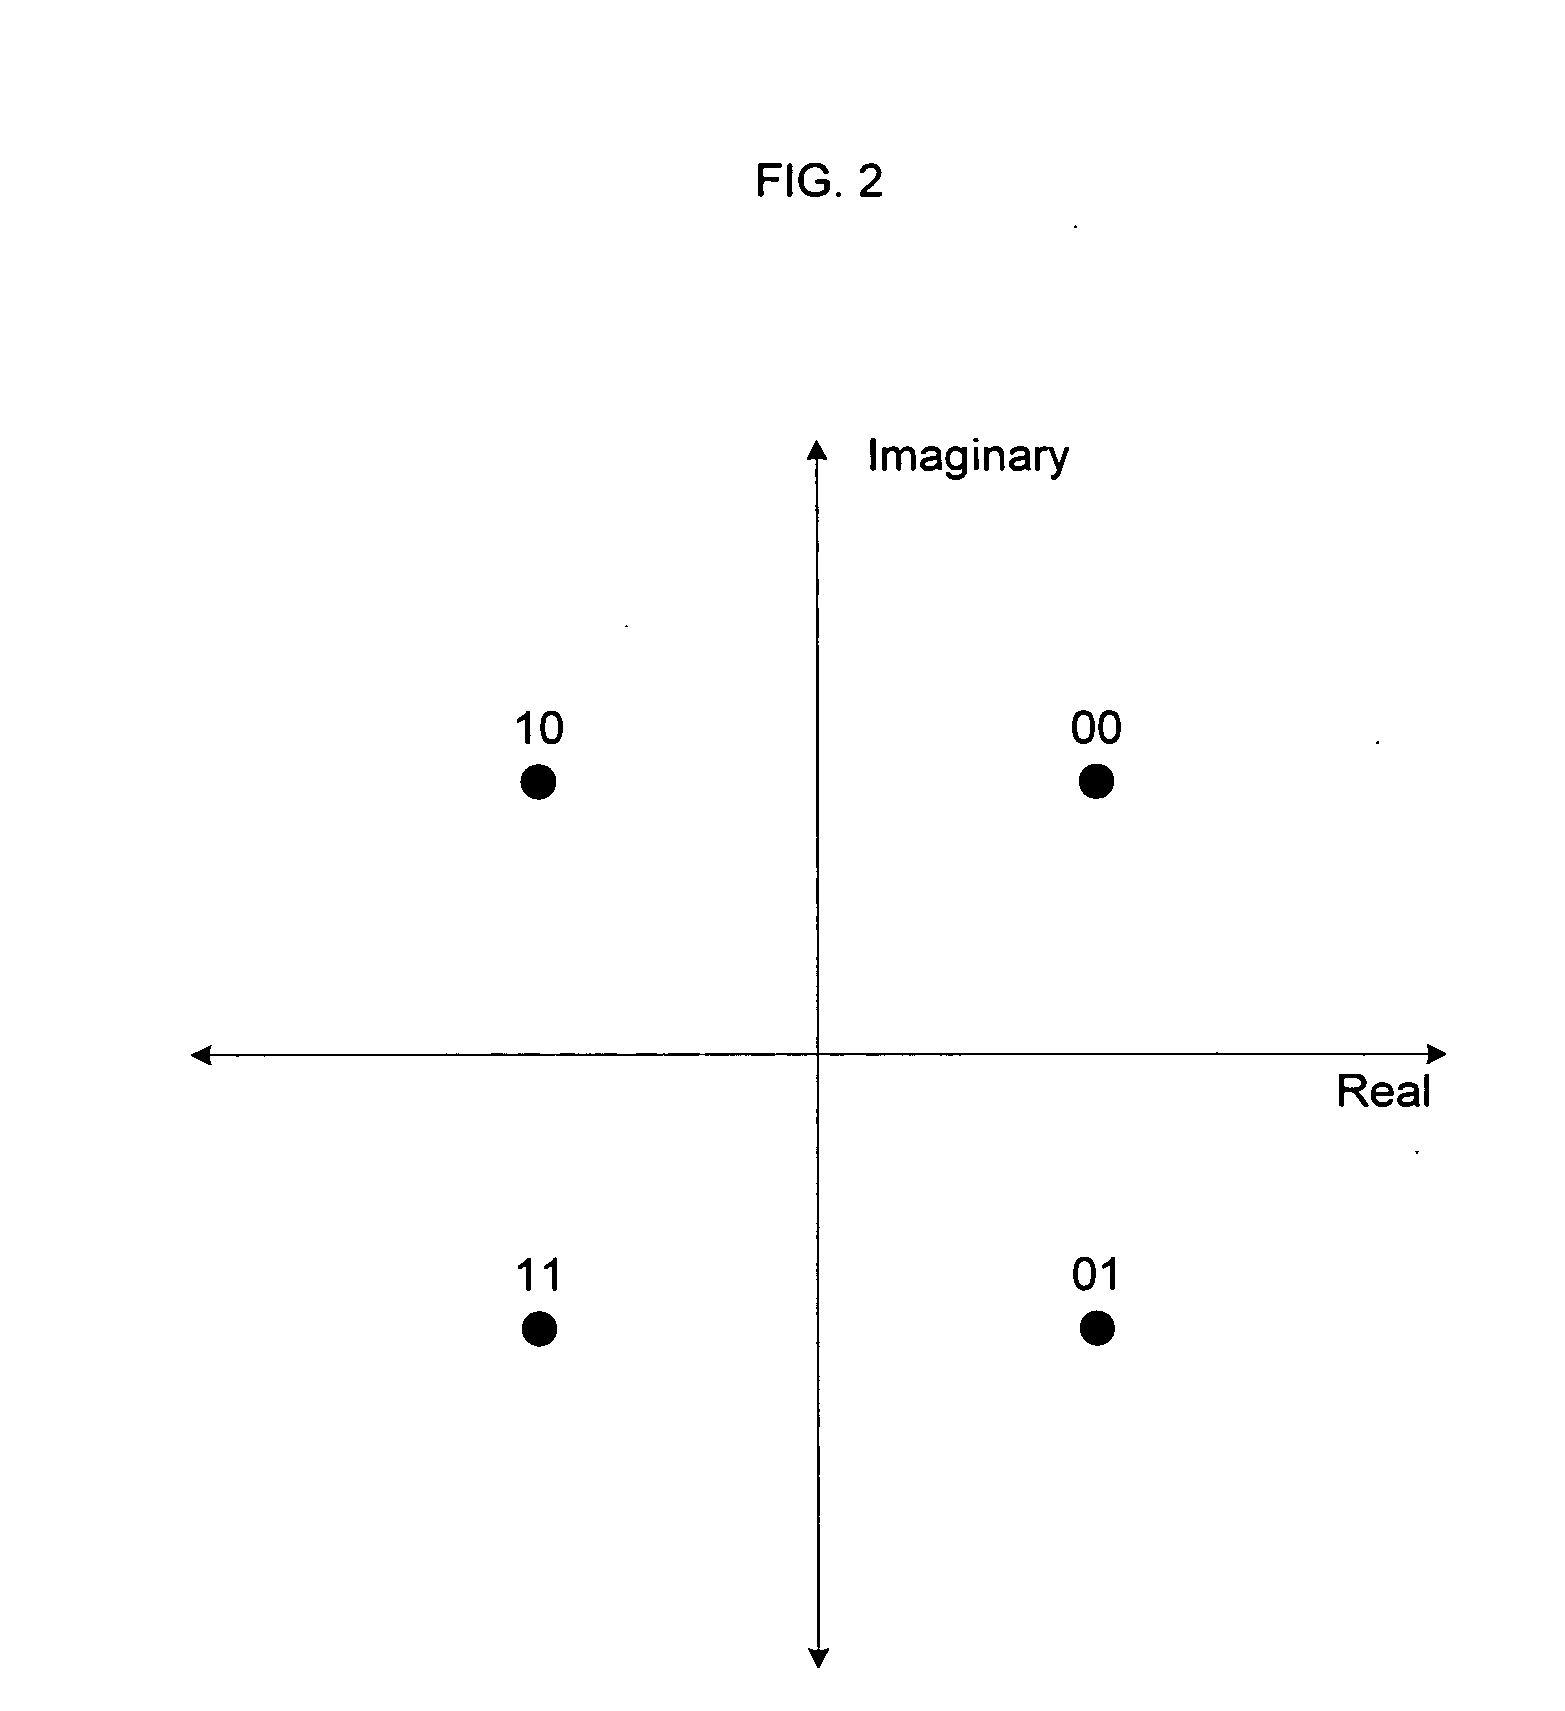 Method and apparatus to improve information decoding when its characteristics are known a priori